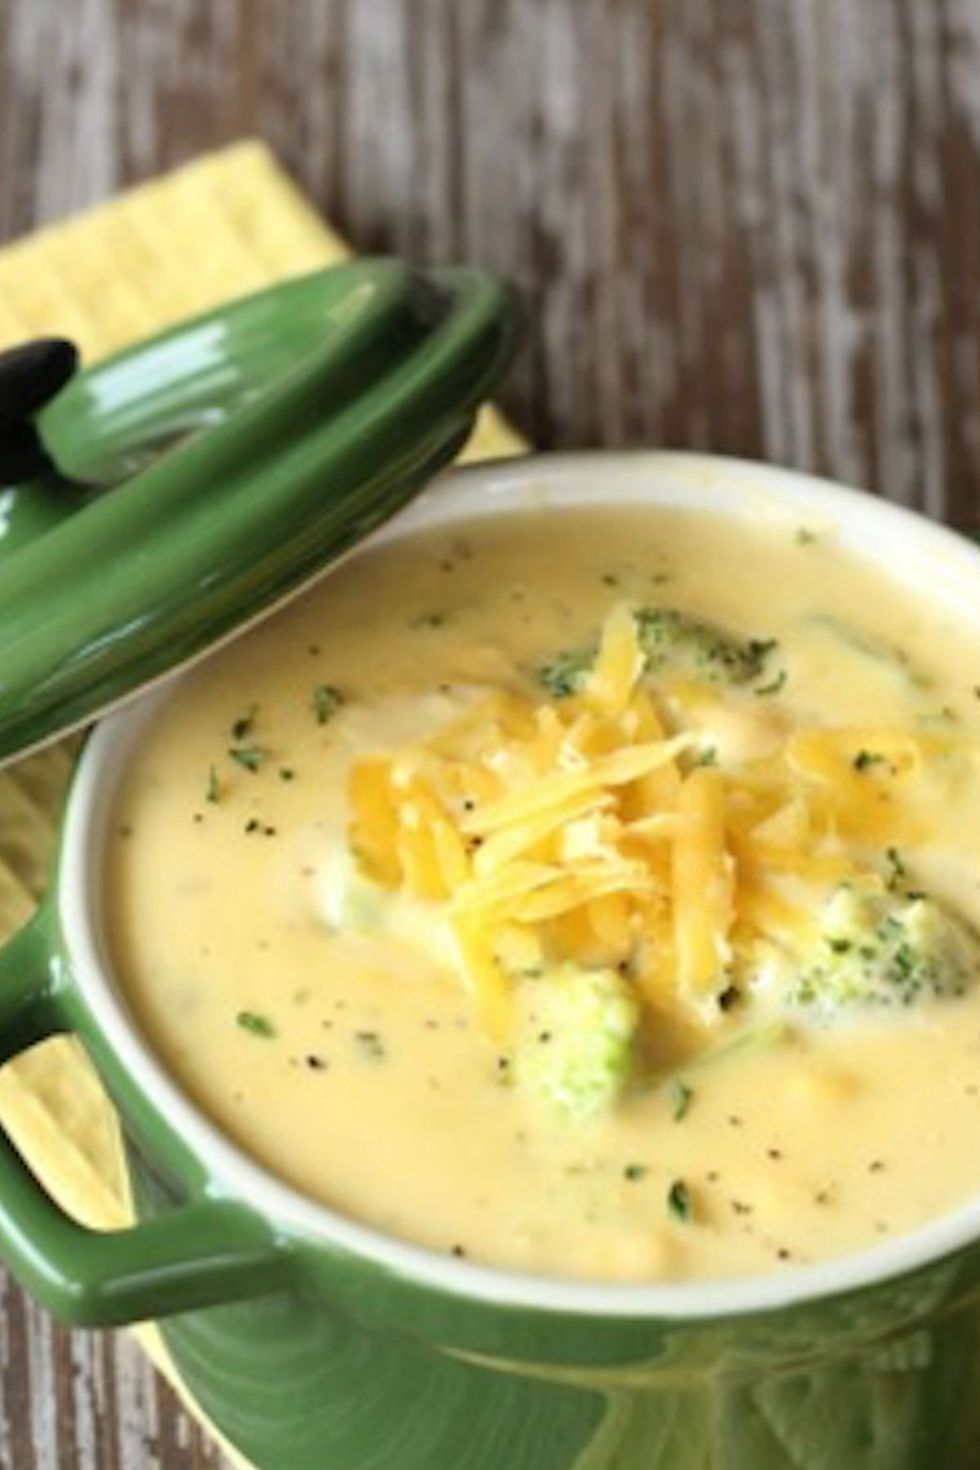 Broccoli Cheese Soup Recipe (5 Ingredients!) - Wholesome Yum